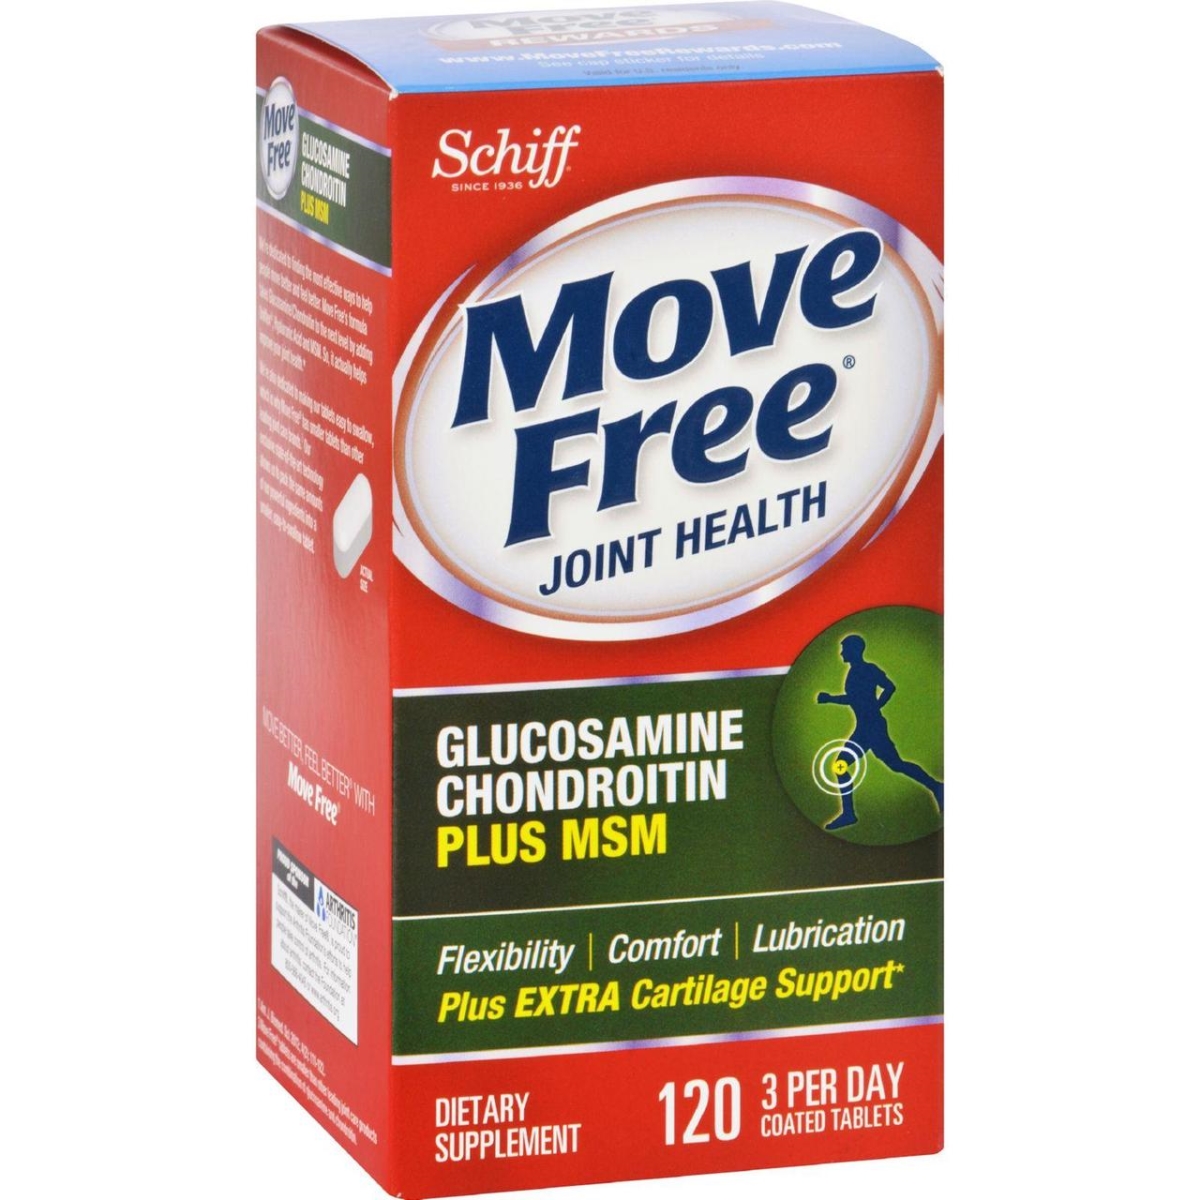 Hg0422261 1500 Mg Move Free Total Joint Health - 120 Coated Tablets